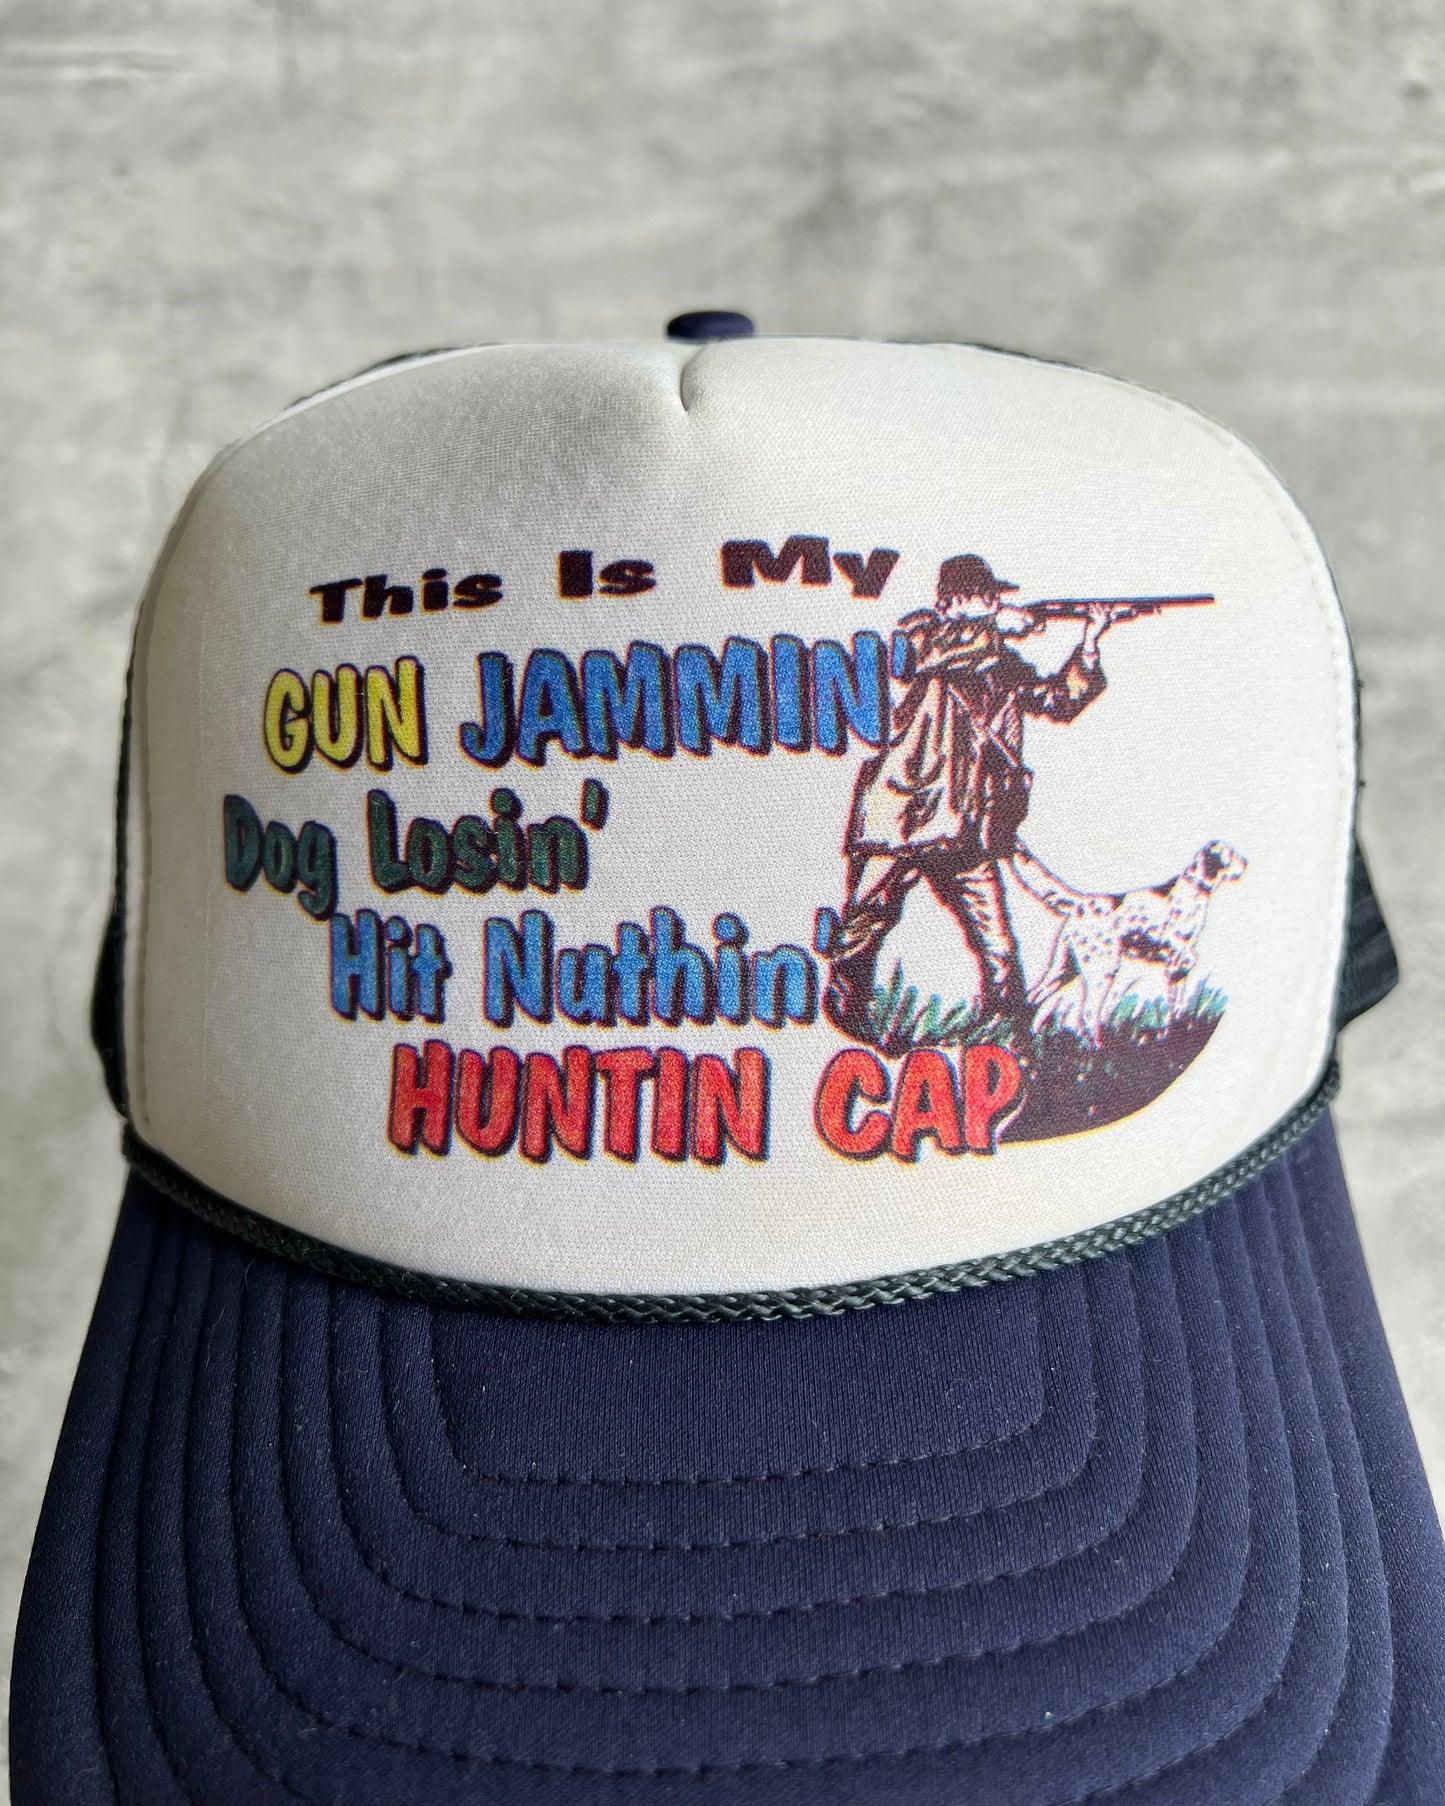 1990S HUNTING TRUCKER HATS (OS)